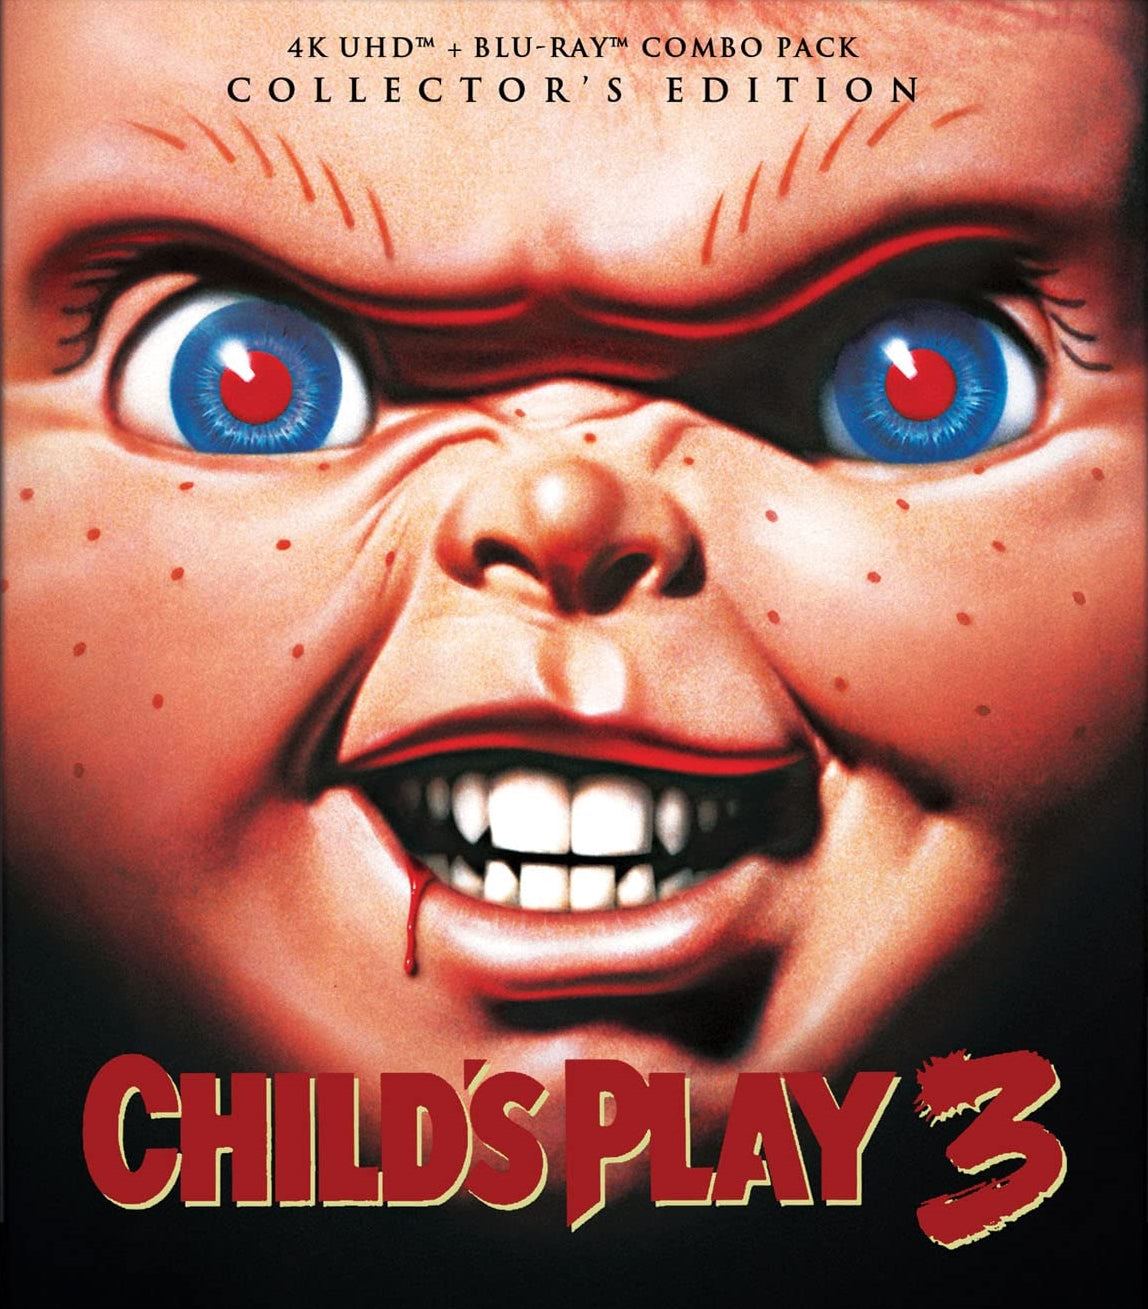 CHILD'S PLAY 3 (COLLECTOR'S EDITION) 4K UHD/BLU-RAY